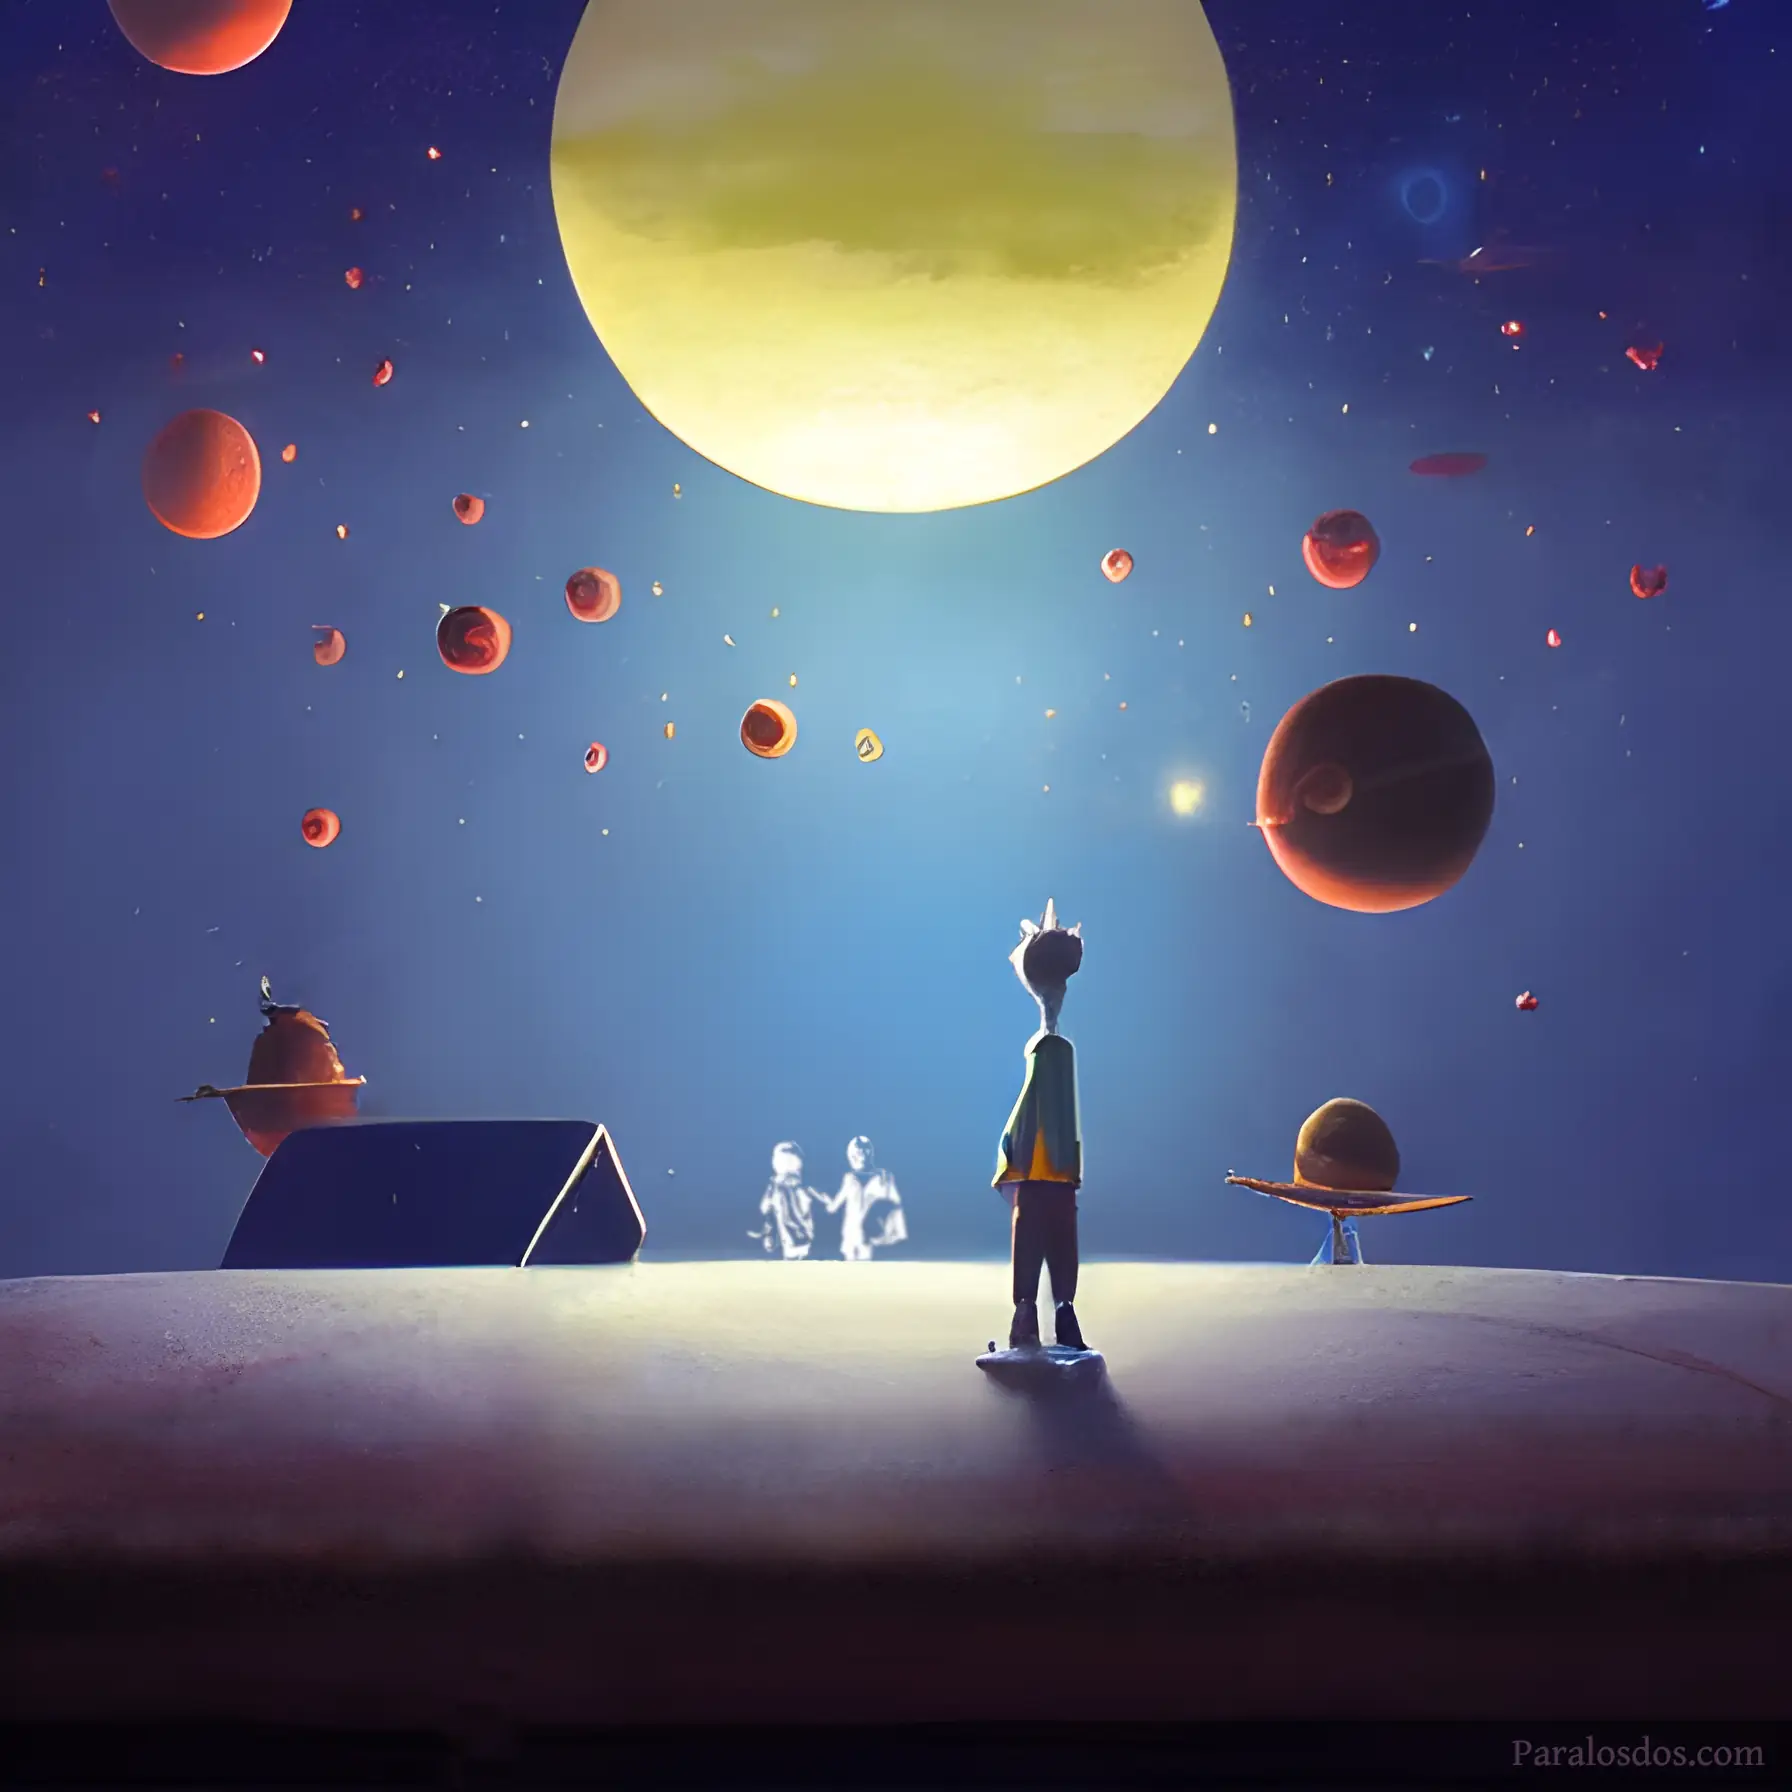 A fantastical artistic rendering of a figure standing on the surface of a planet looking at a sky full of planets.